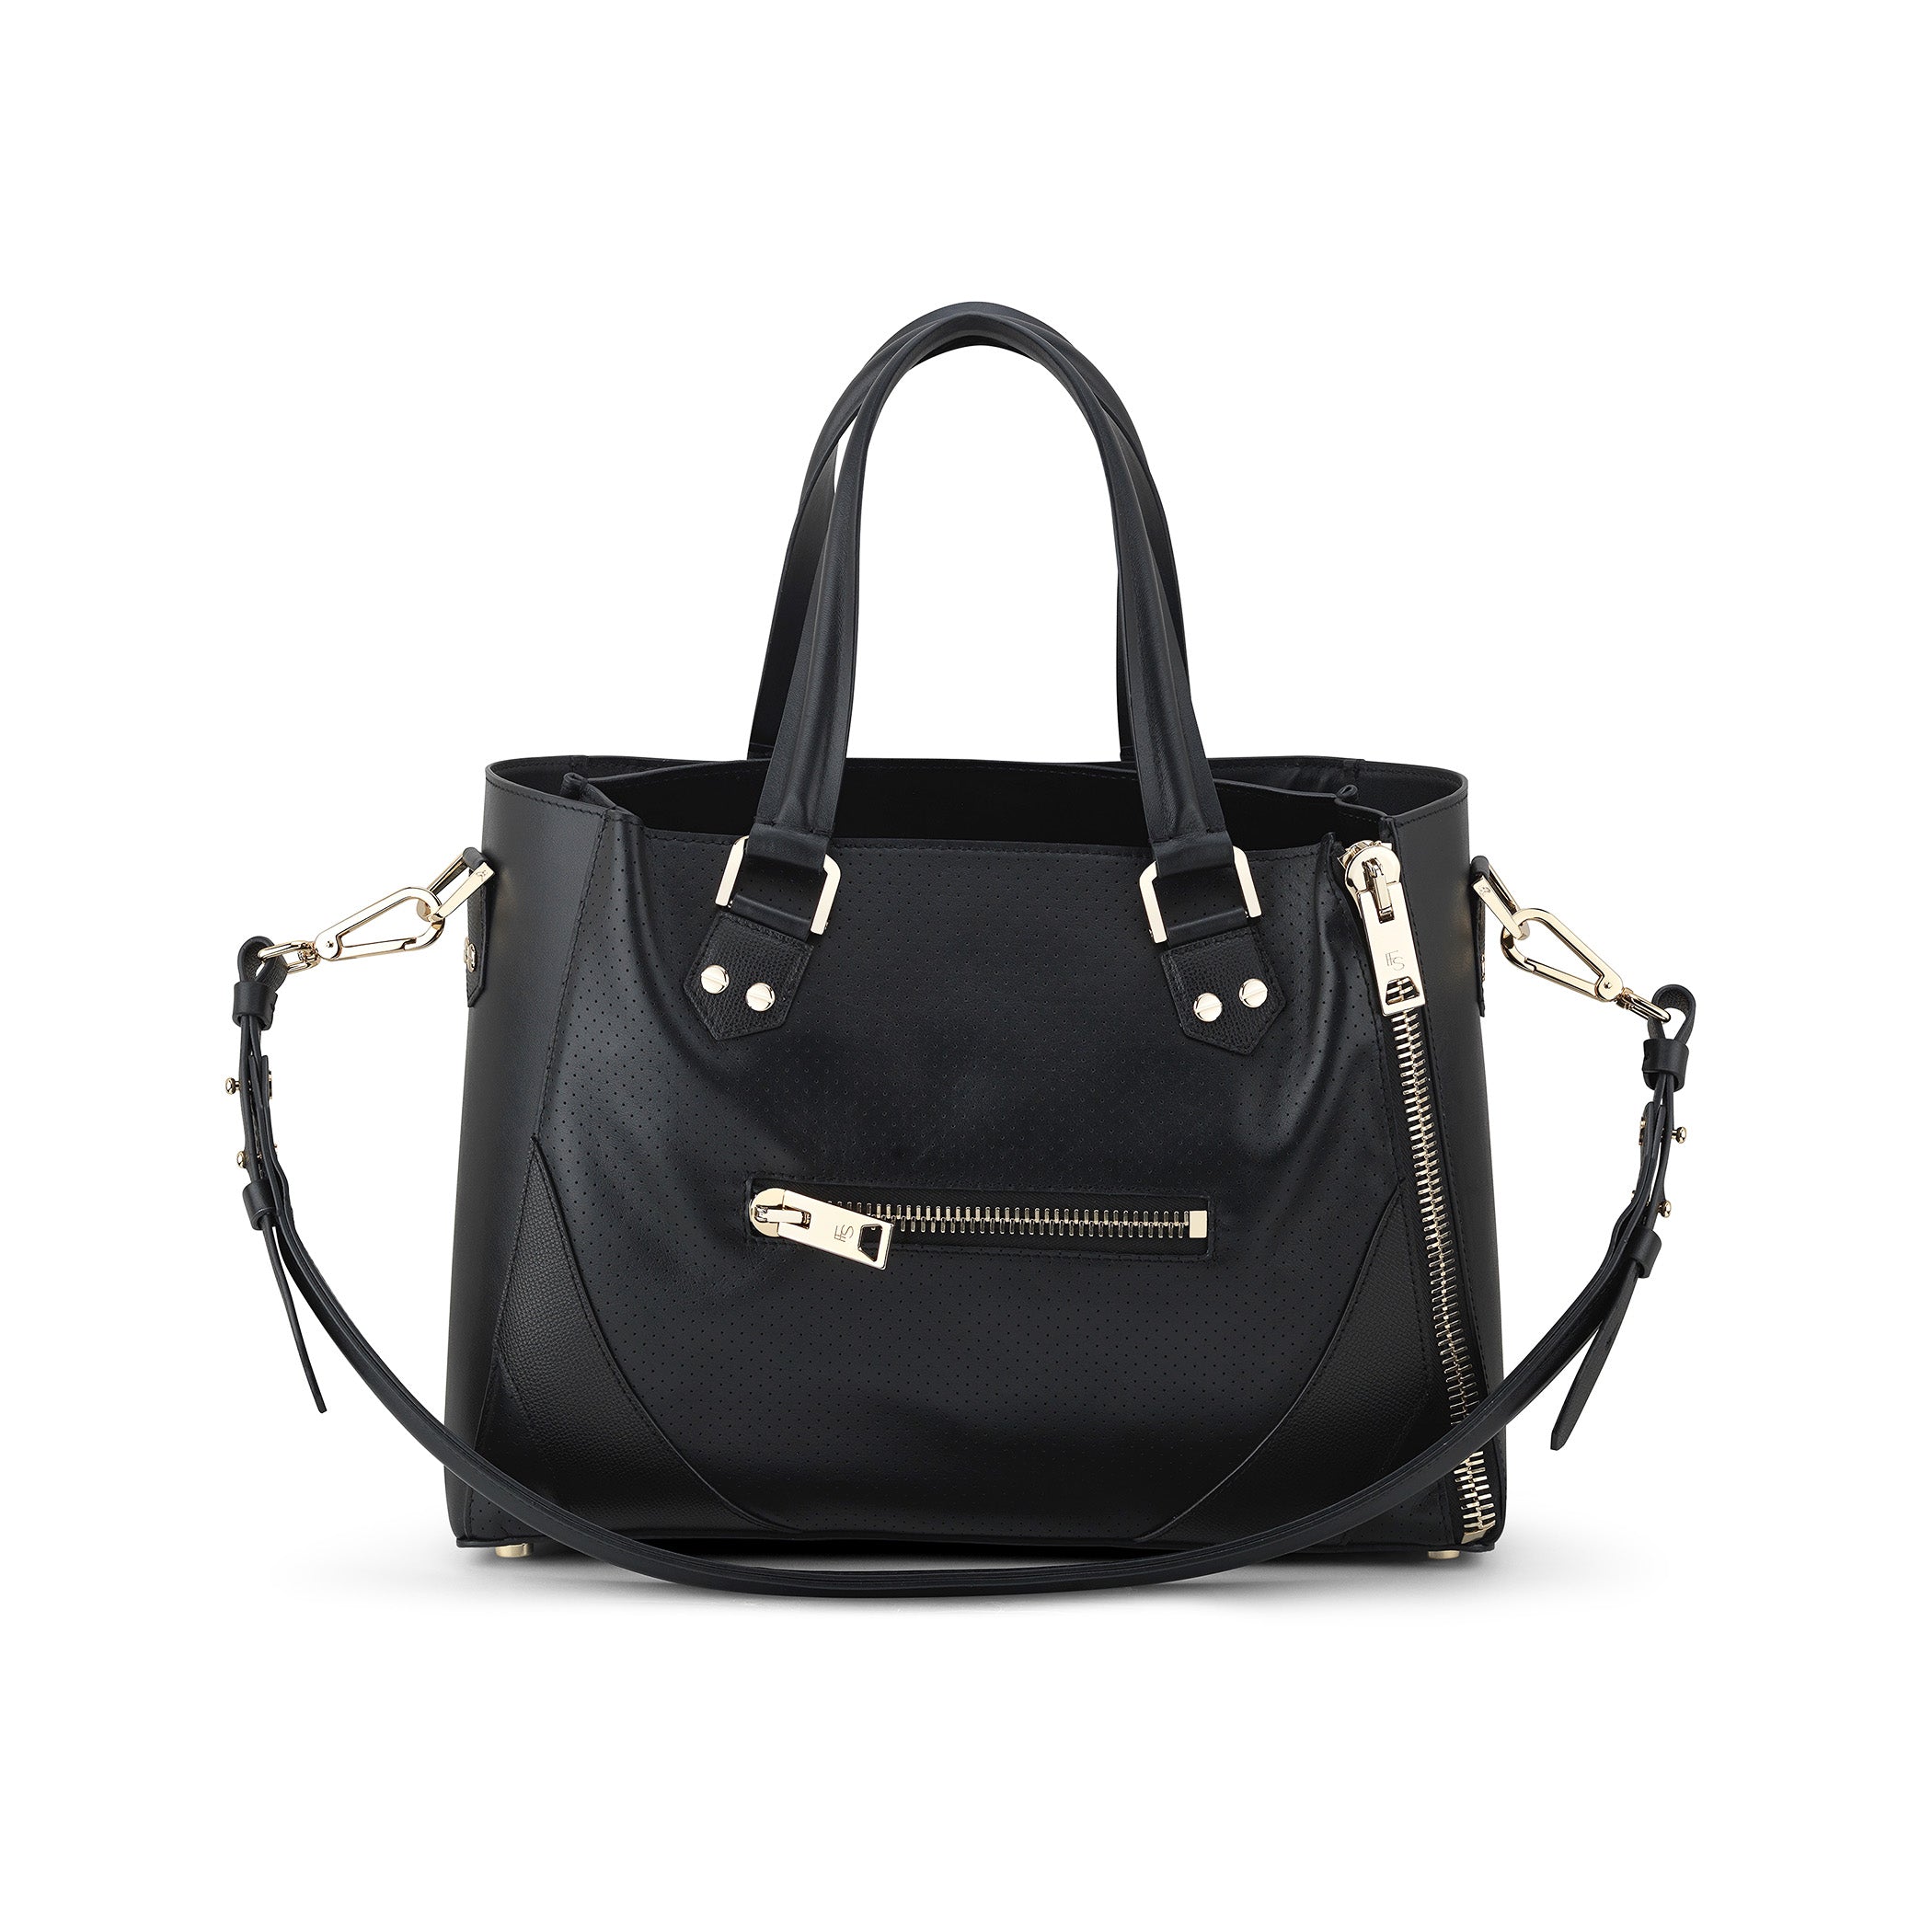 One Bag (Black Leather w/Gold Hardware)